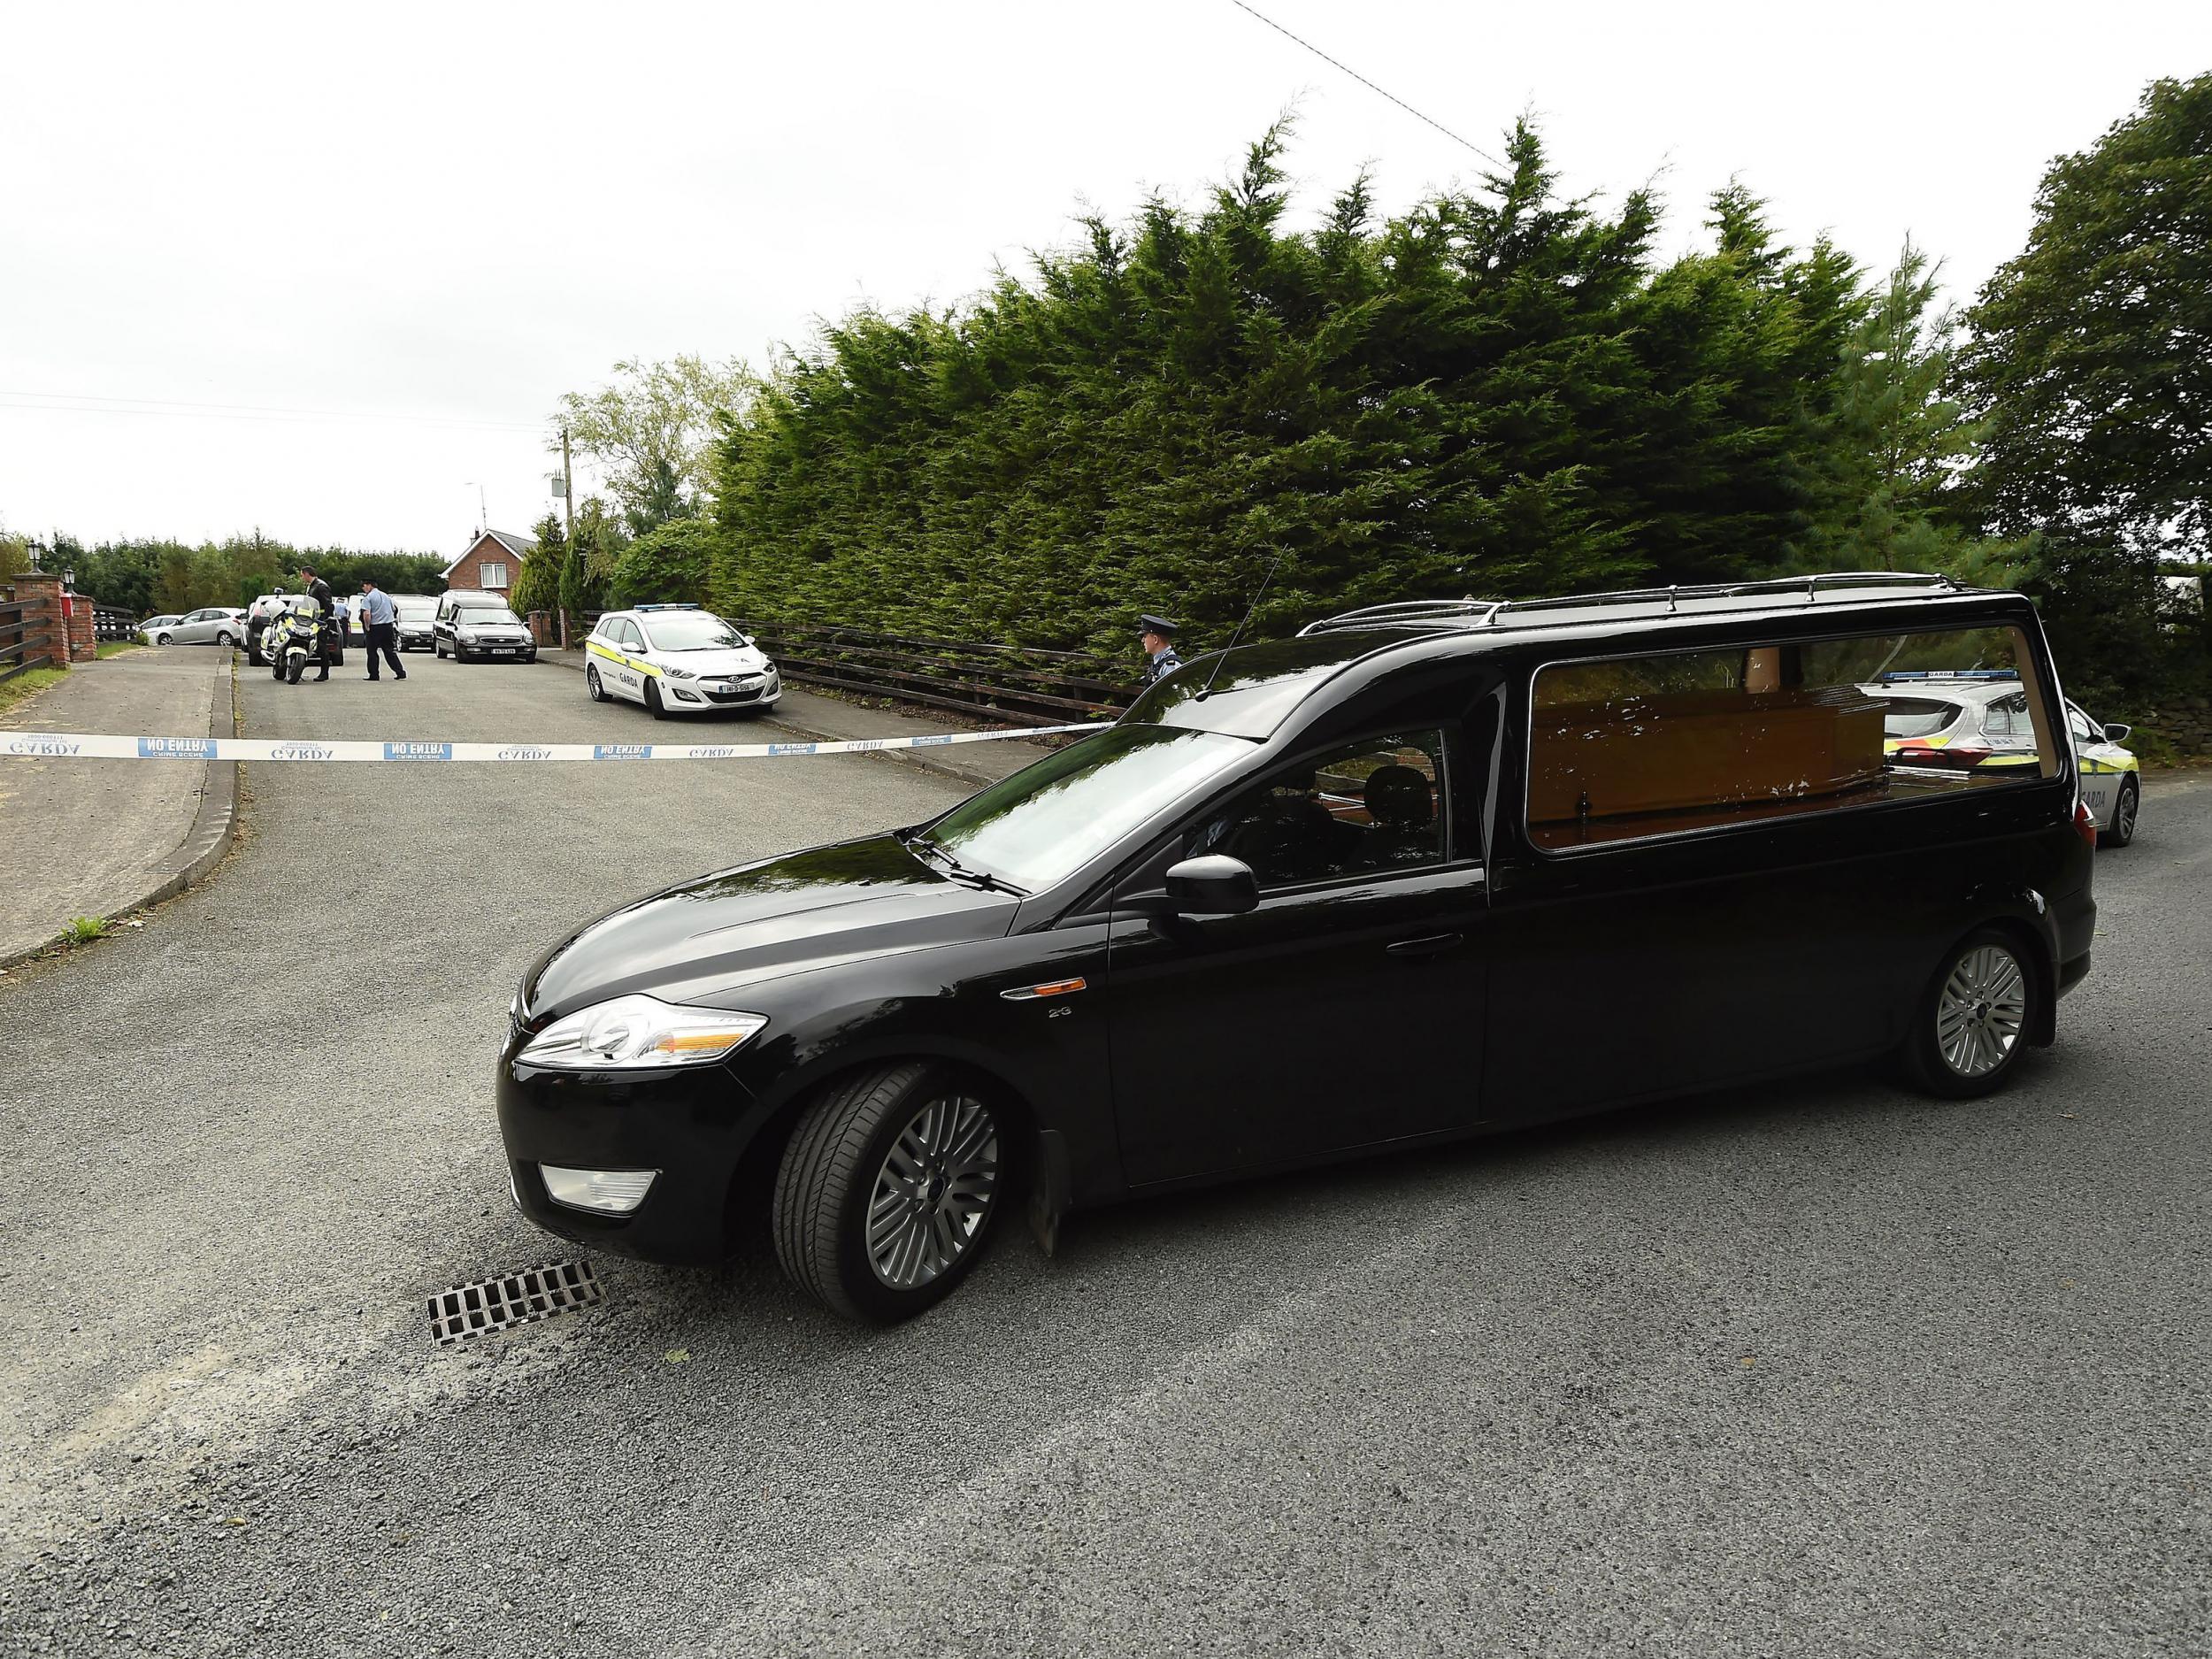 A hearse leaves the scene at Oakdene, Barconey, Ballyjamesduff in Cavan, where a family of five were found dead in their countryside home